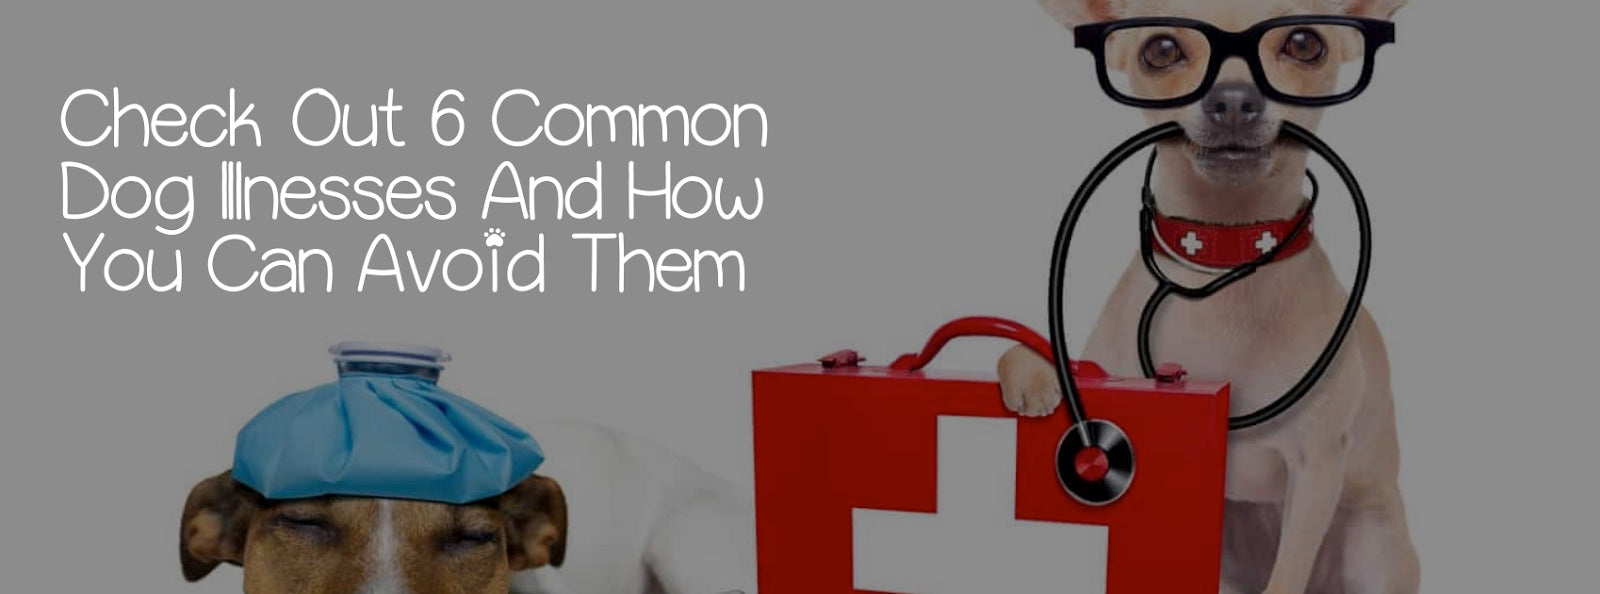 CHECK OUT 5 COMMON  DOG ILLNESSES AND HOW  YOU CAN AVOID THEM